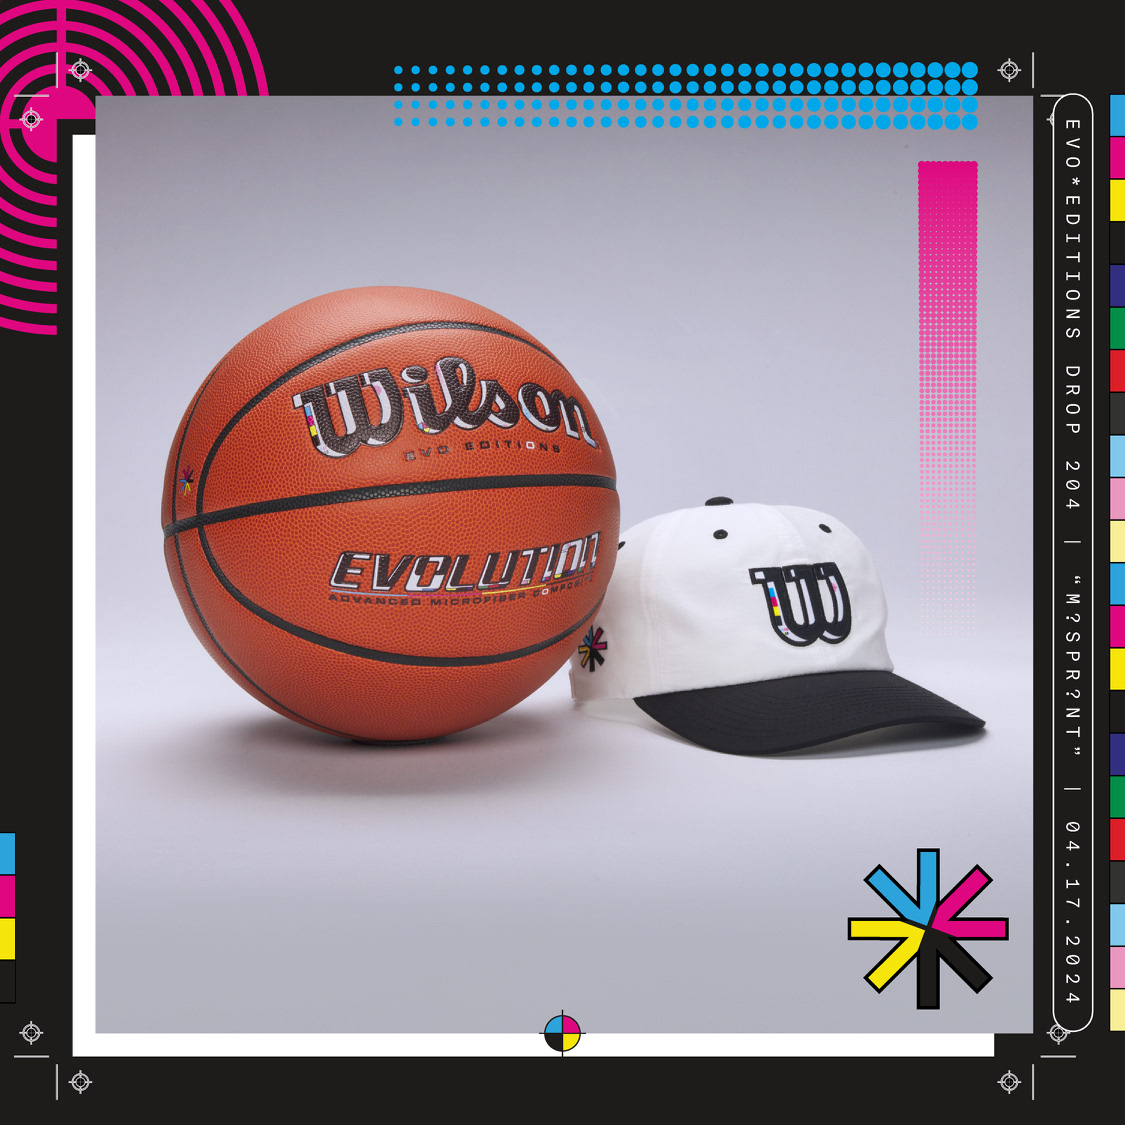 Evo*Editions Drop 204 “M?SPR?NT” turns work-in-progress into a work of art with offset type that gives a glimpse behind the CMYK curtain. Matched with an equally clean white hat. Tap below to grab the latest fully-playable Evo*Editions drop! - - ➡️: wilsonlive.app.link/K53uq8lVJIb - -